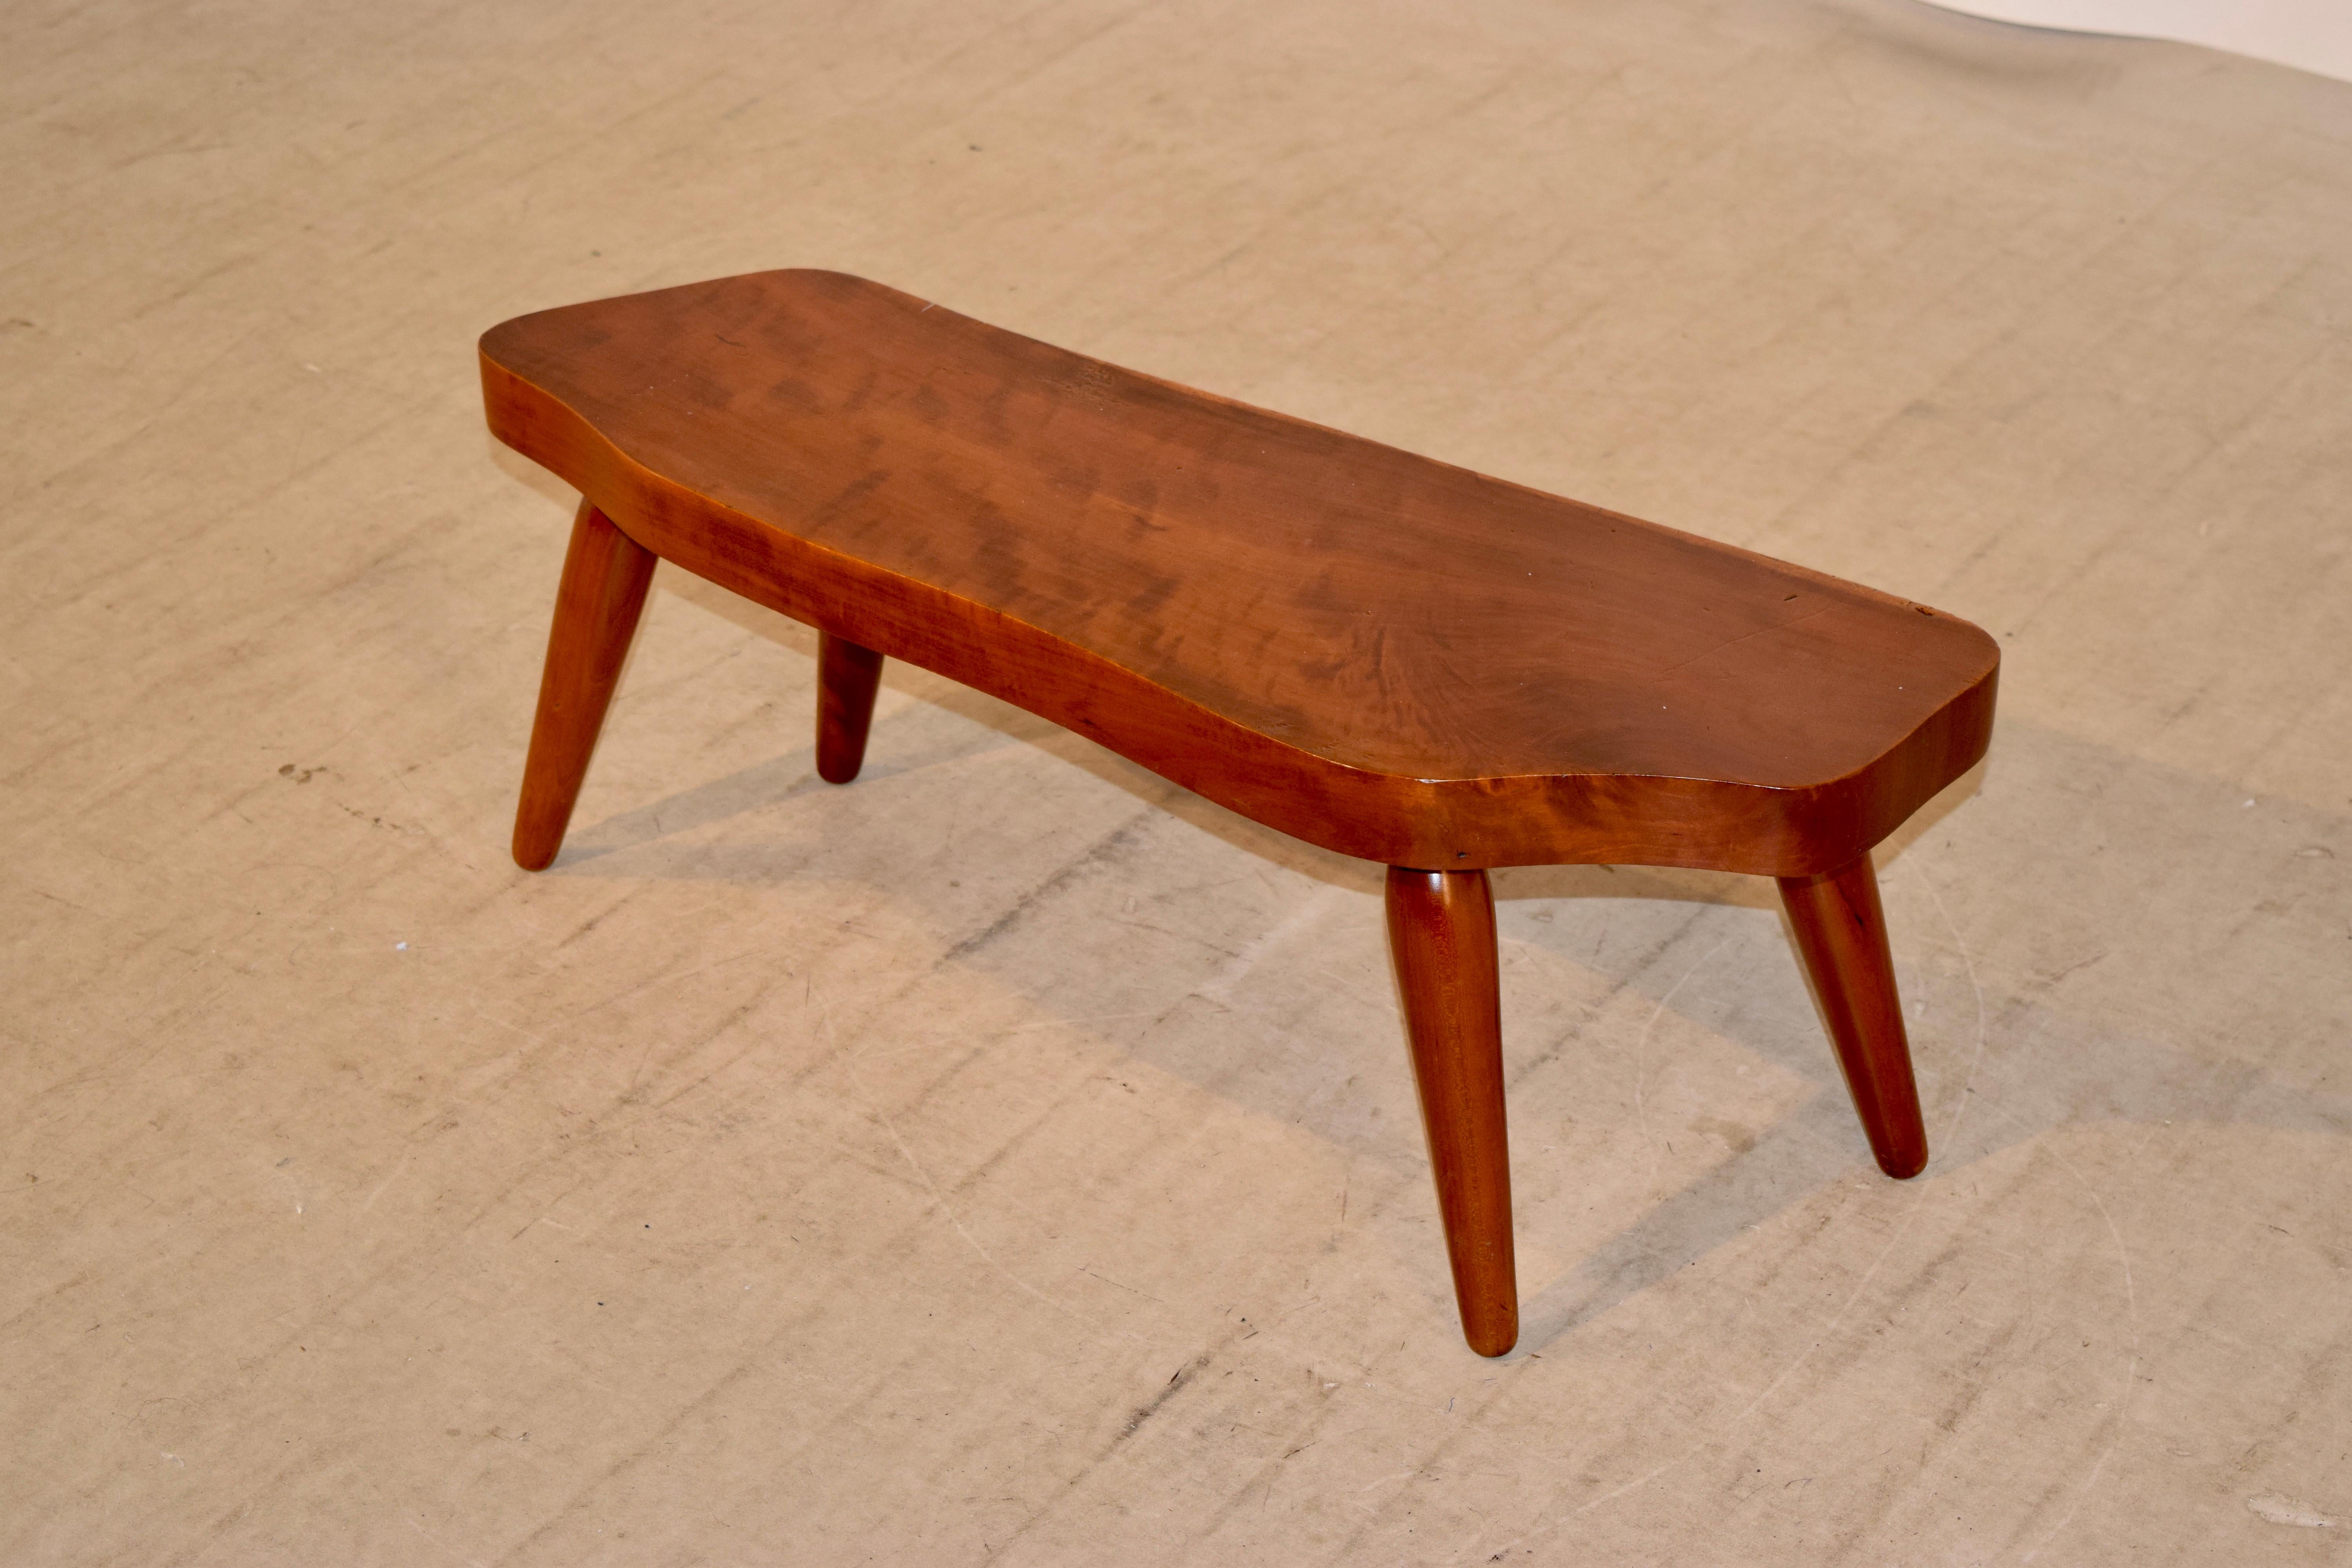 Handmade cocktail table made from Cherry in the North Carolina mountains, circa 1960. The table was purchased from the famed Moses Cone Craft Center in 1960, which housed all of the finest Appalachian craftsman at that time. The table is a slice of